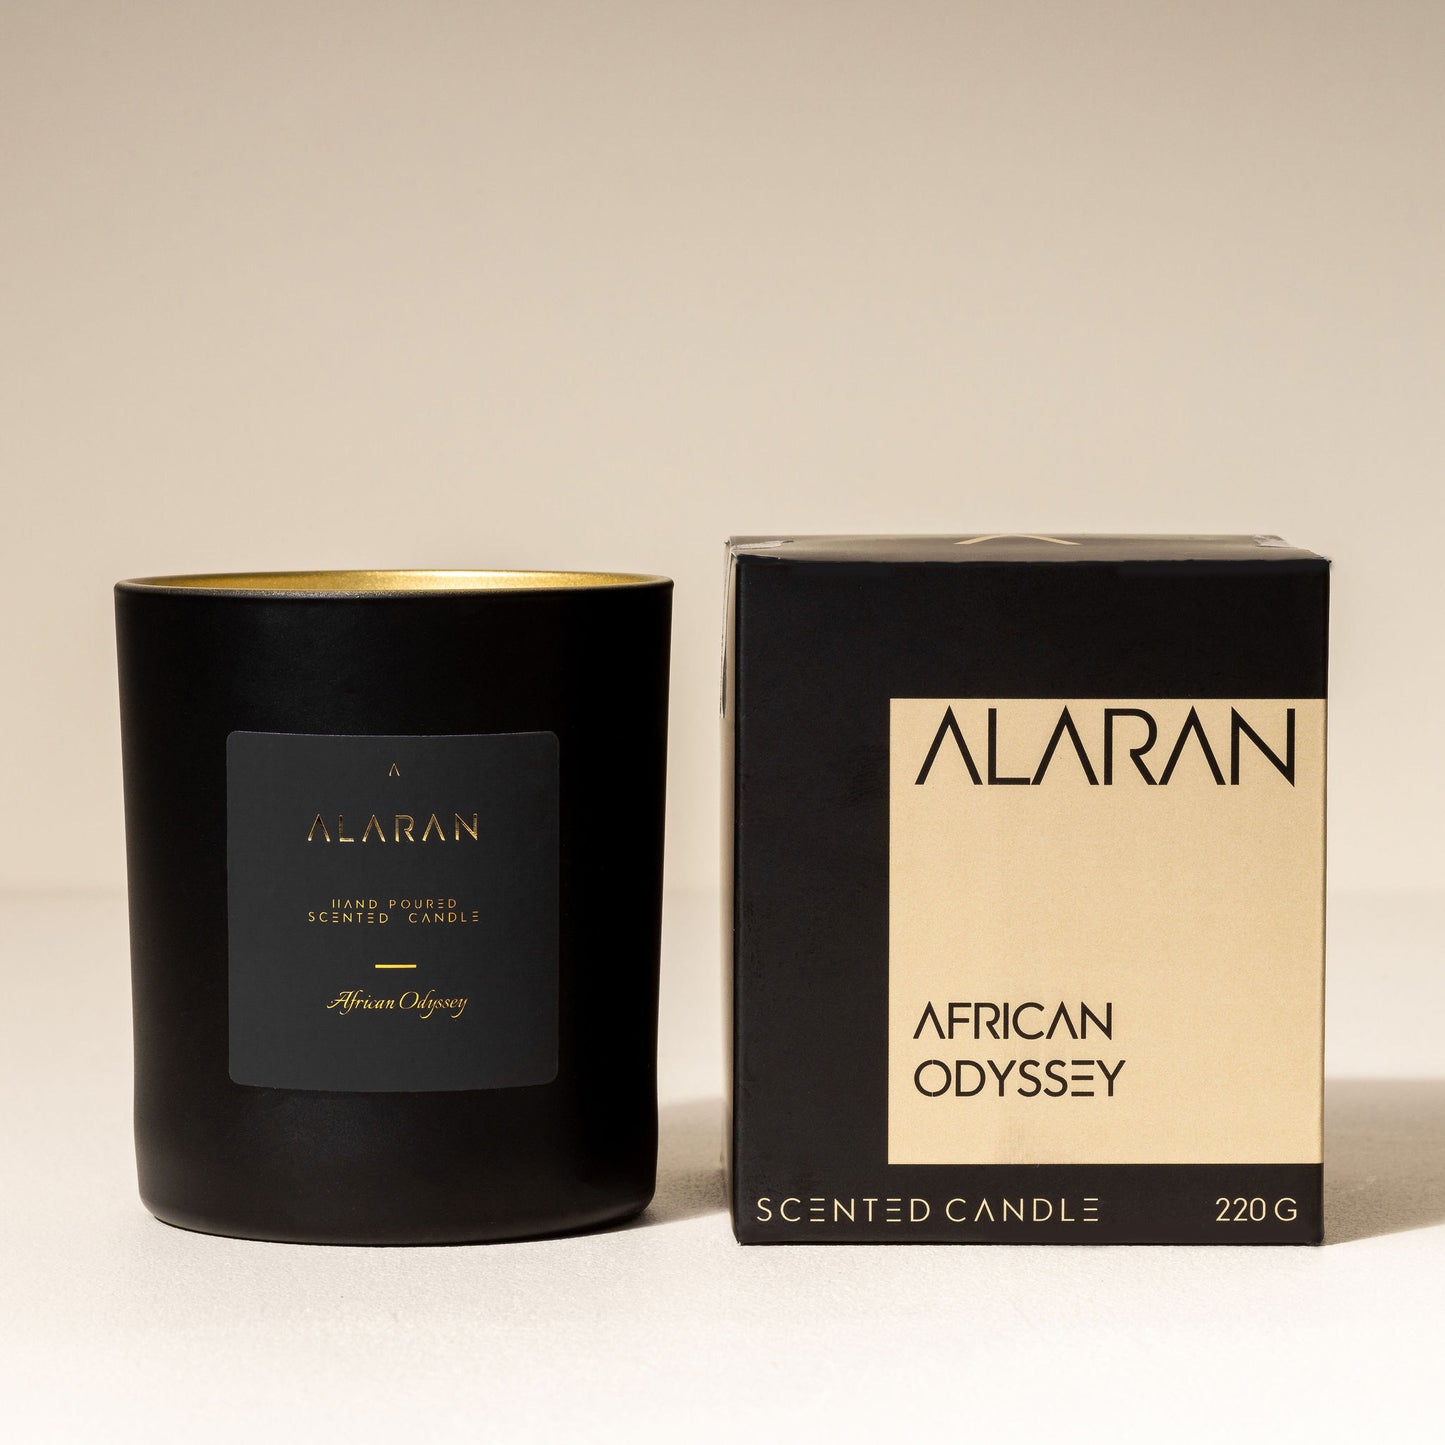 African Odyssey Candle with packaging on a neutral background